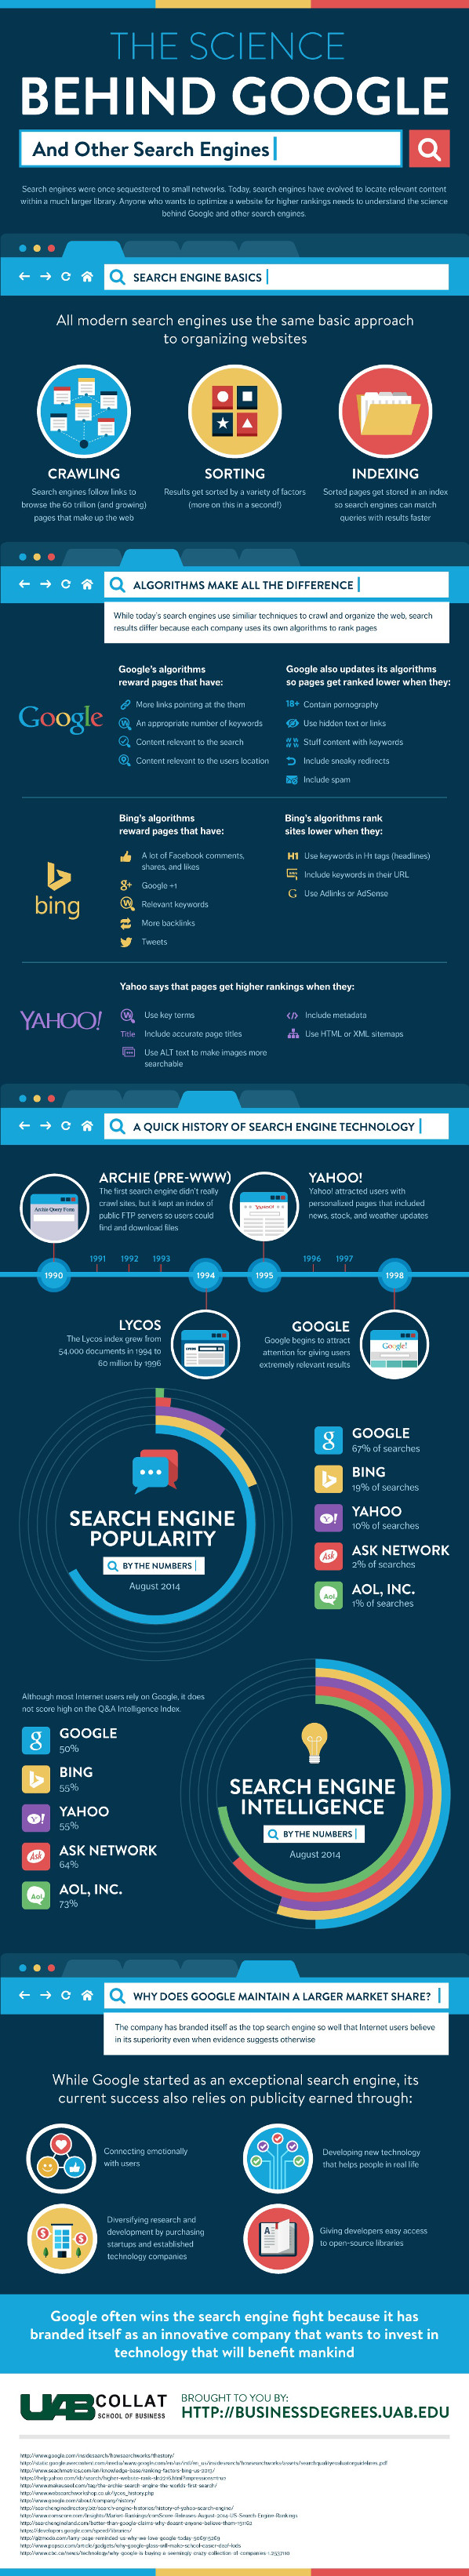 Search-engines-infographic